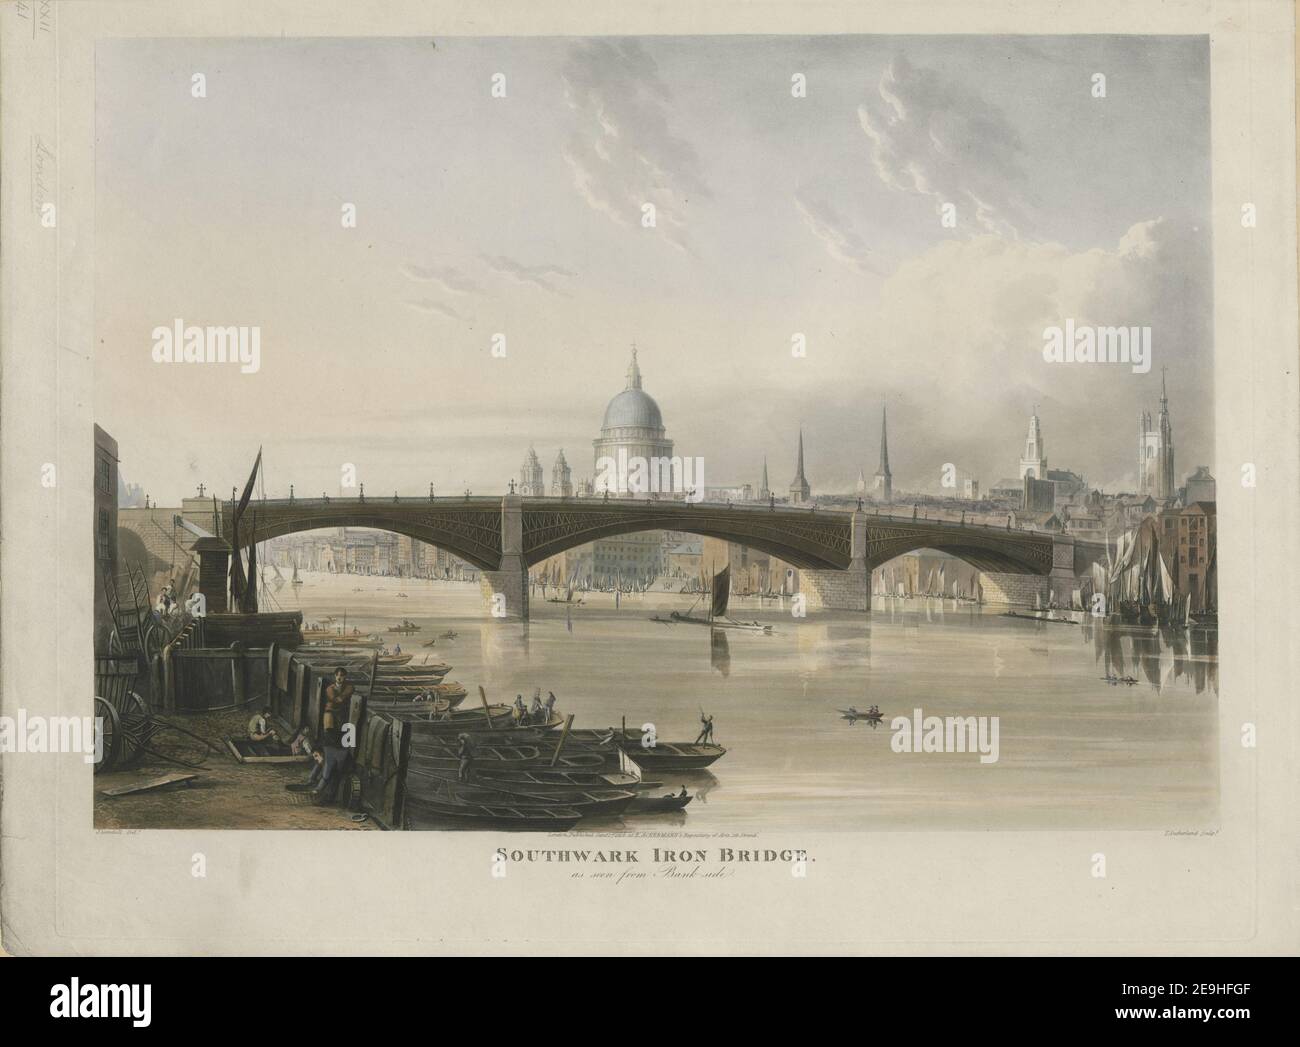 SOUTHWARK IRON BRIDGE as seen from Bankside.  Author  Sutherland, Thomas 22.41. Place of publication: London Publisher: Published Jany 1st 1819, at R. ACKERMANN'S Repository of Arts, 101 Strand., Date of publication: [January 1 1819]  Item type: 1 print Medium: aquatint and etching with hand-colouring Dimensions: platemark 41.9 x 52.8 cm (cut to within platemark along upper edge), on sheet 42.8 x 57.2 cm  Former owner: George III, King of Great Britain, 1738-1820 Stock Photo